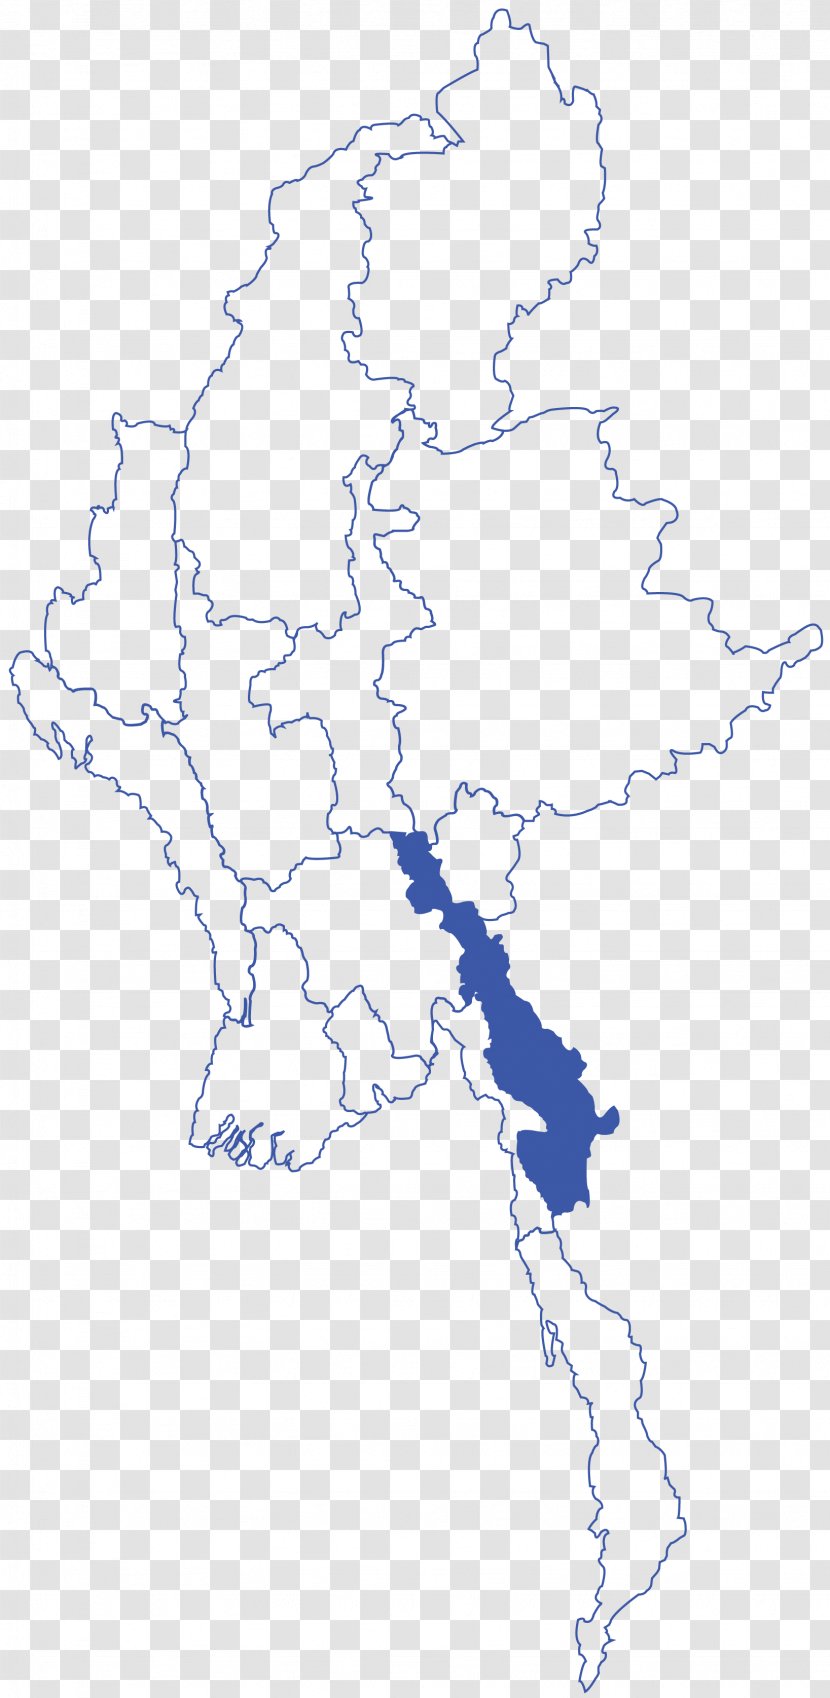 Administrative Divisions Of Myanmar Hpa-An Loikaw Kayah State Jurisdiction - All Transparent PNG